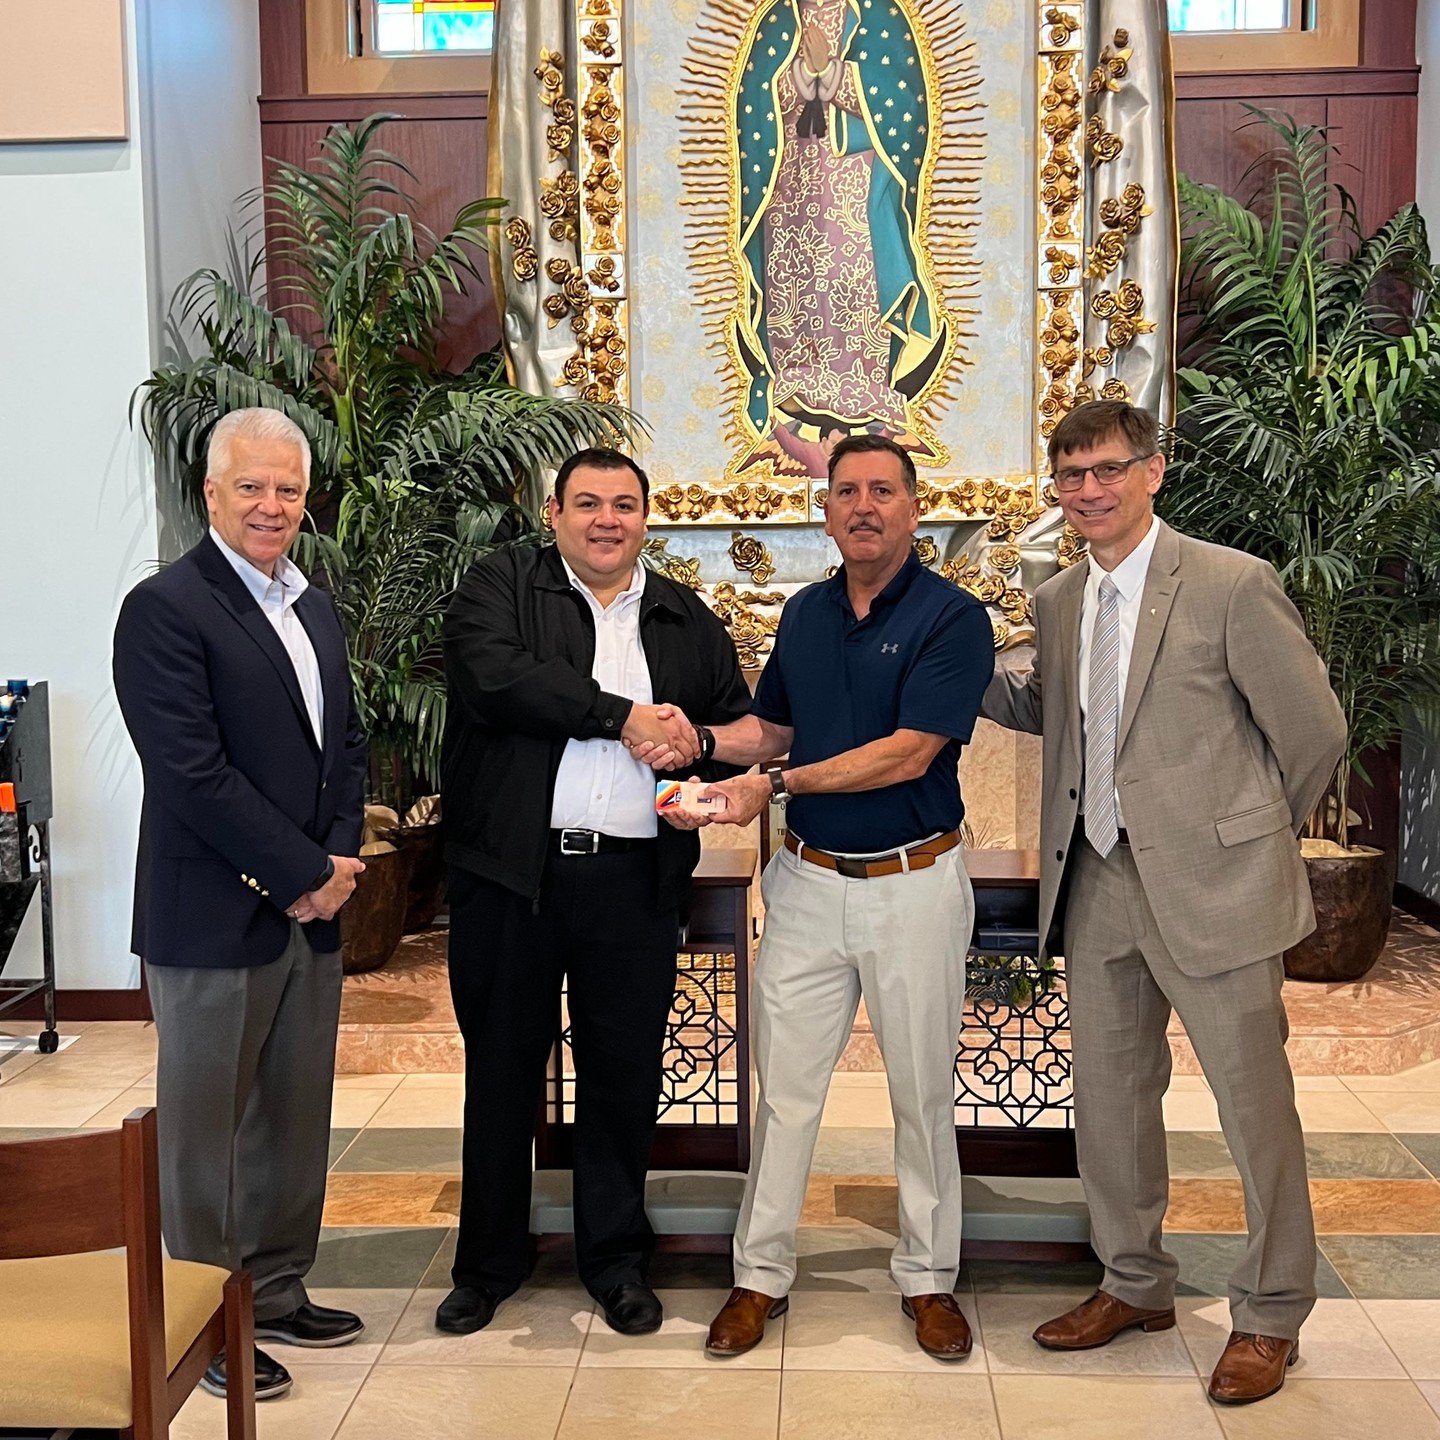 Members of the Knights of Columbus show love for their neighbors by conducting food drives and making donations. This demonstrates our principle of Charity. Our Council #15590 donated $700 worth of Aldi gift cards to the OLG Hispanic Ministry c/o Dav